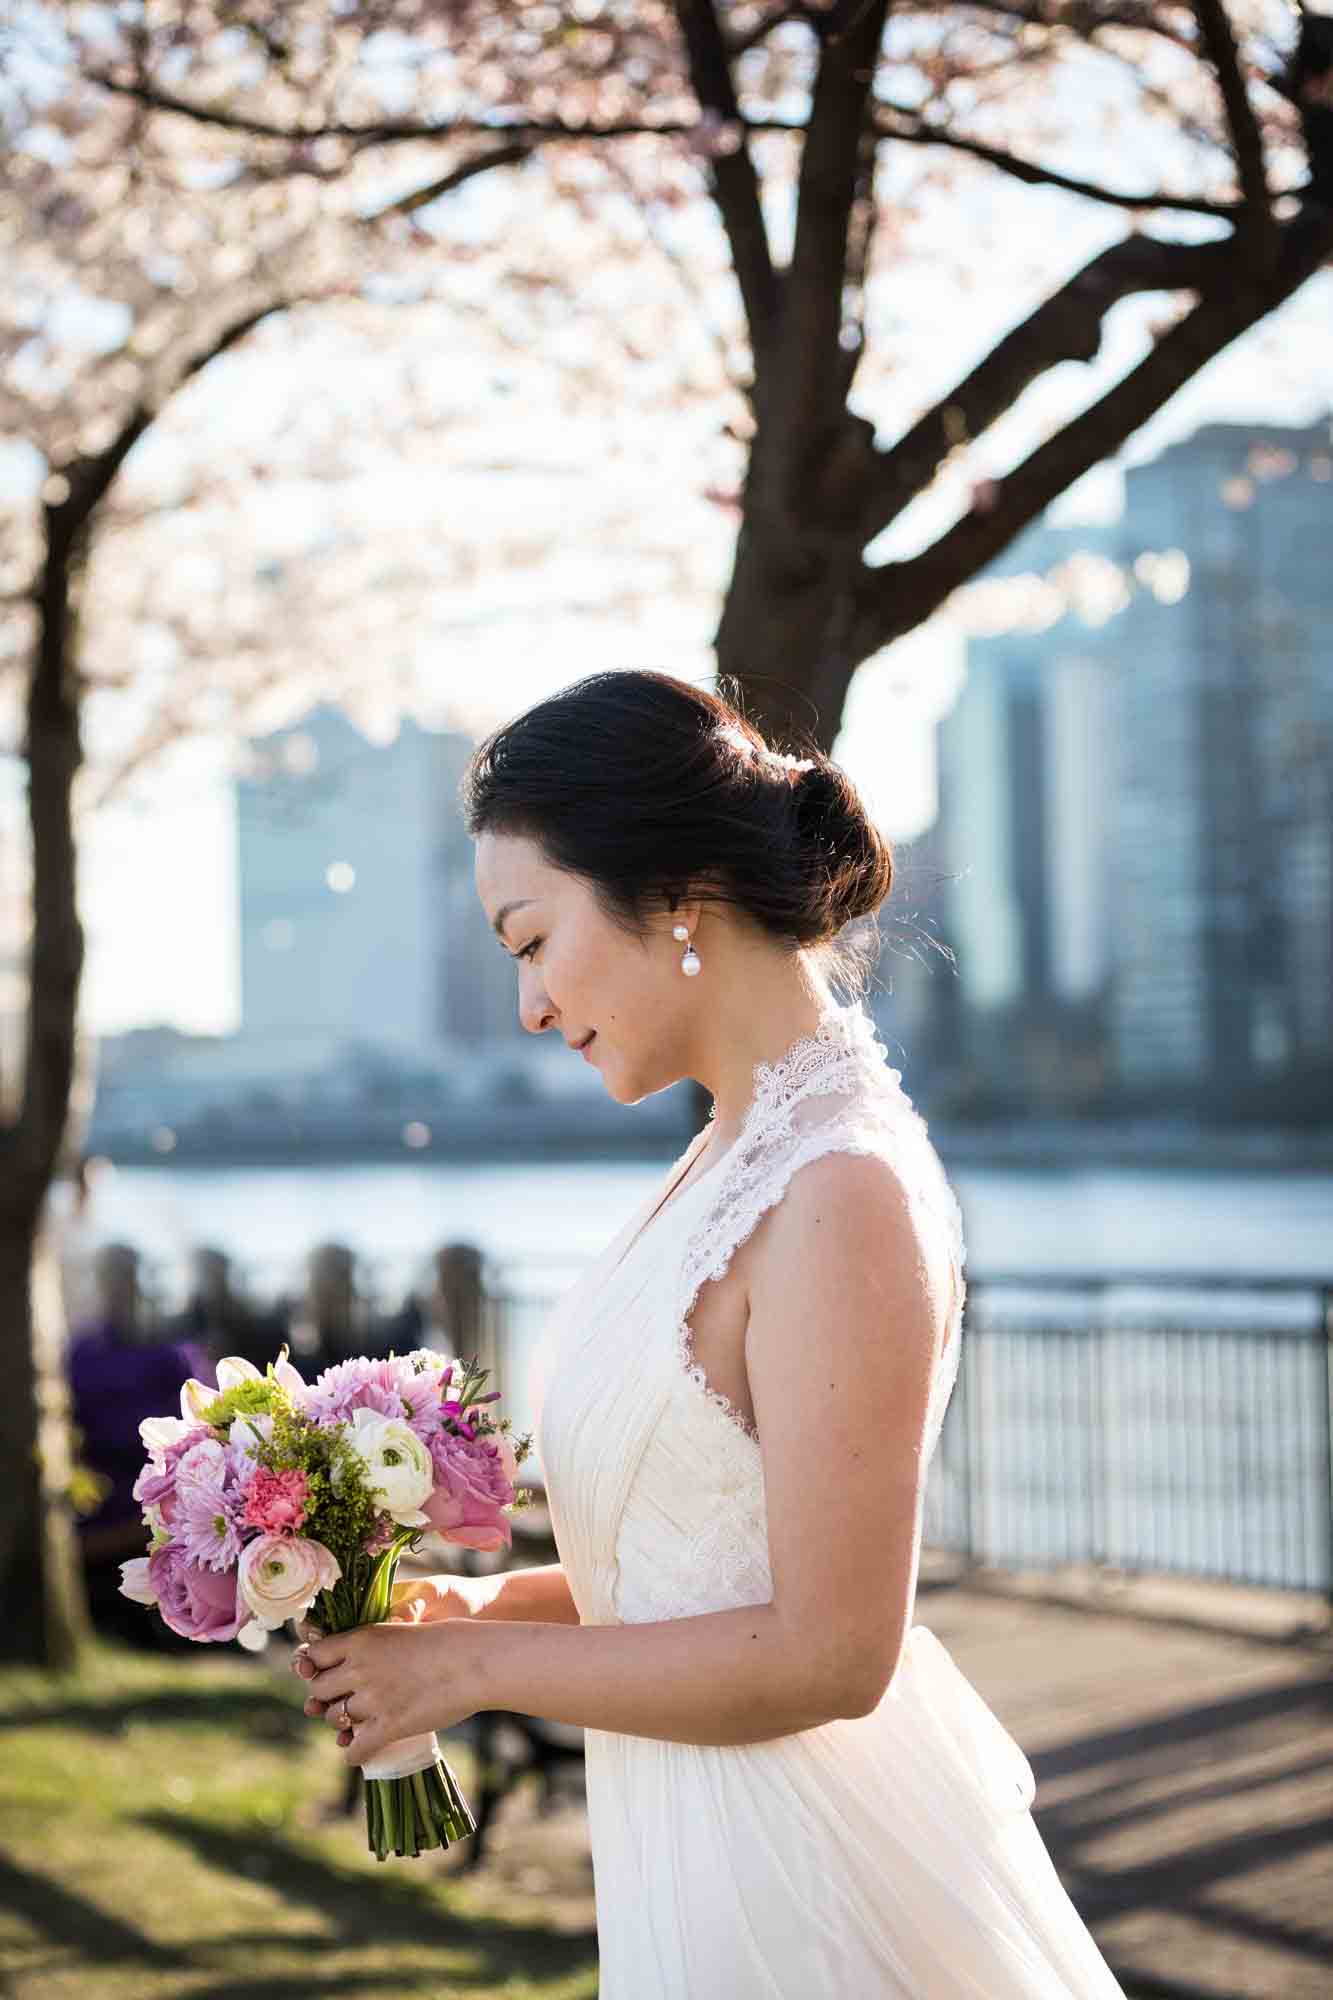 Woman wearing white dress looking down at flower bouquet Couple walking under cherry blossom trees during a Roosevelt Island engagement photo shoot